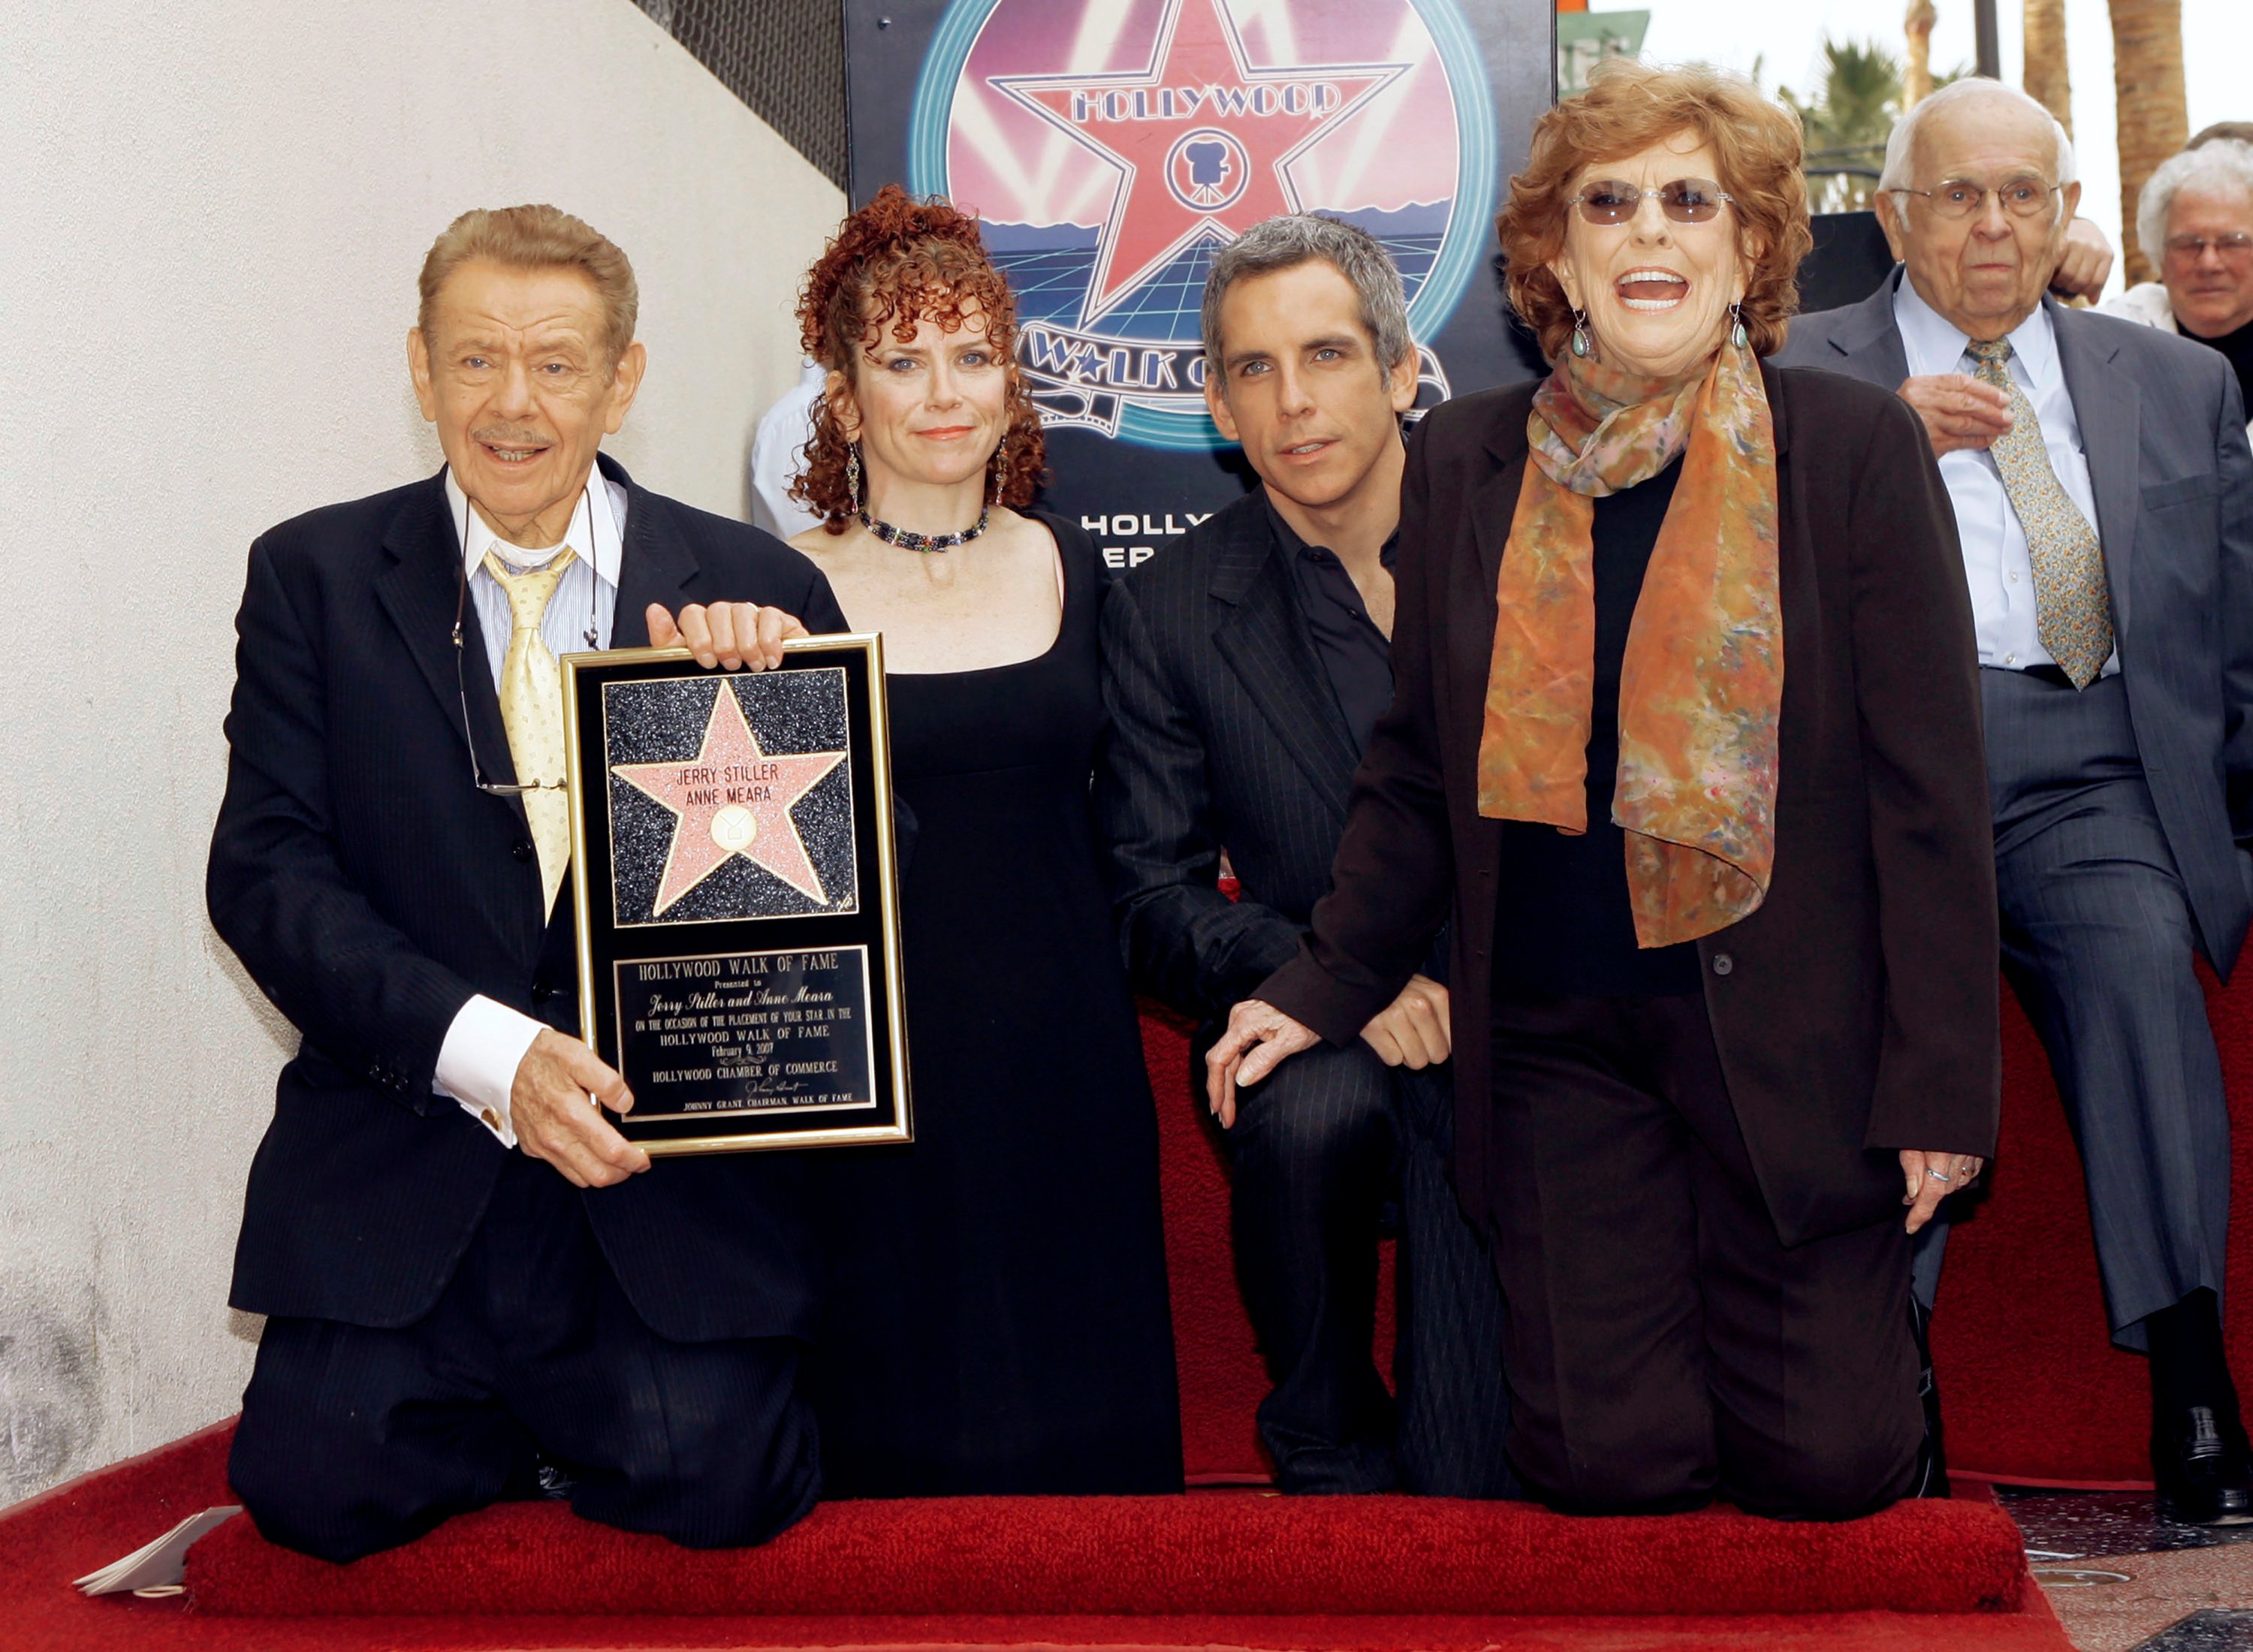 Actors Jerry Stiller (far L) and Anne Meara (2nd R) pose with their children, Ben Stiller and Amy Stiller, as they are honored with a star of the Hollywood Walk of Fame in Los Angeles,  Feb. 9, 2007. (AP Photo)